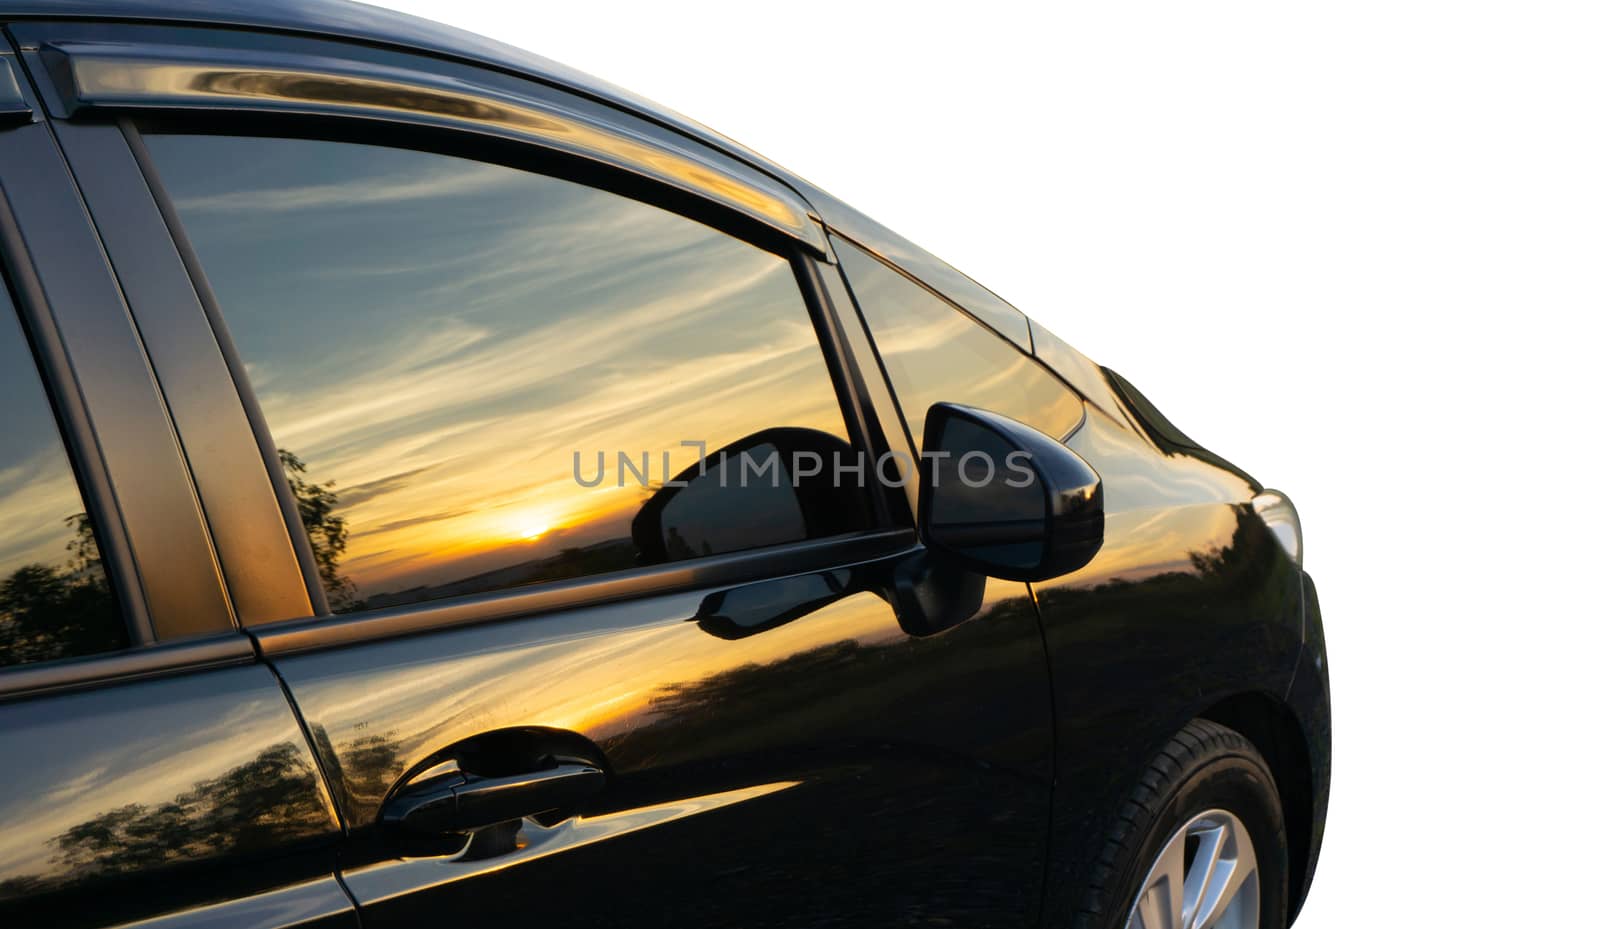 Crop shot of Black car isolated on white background.